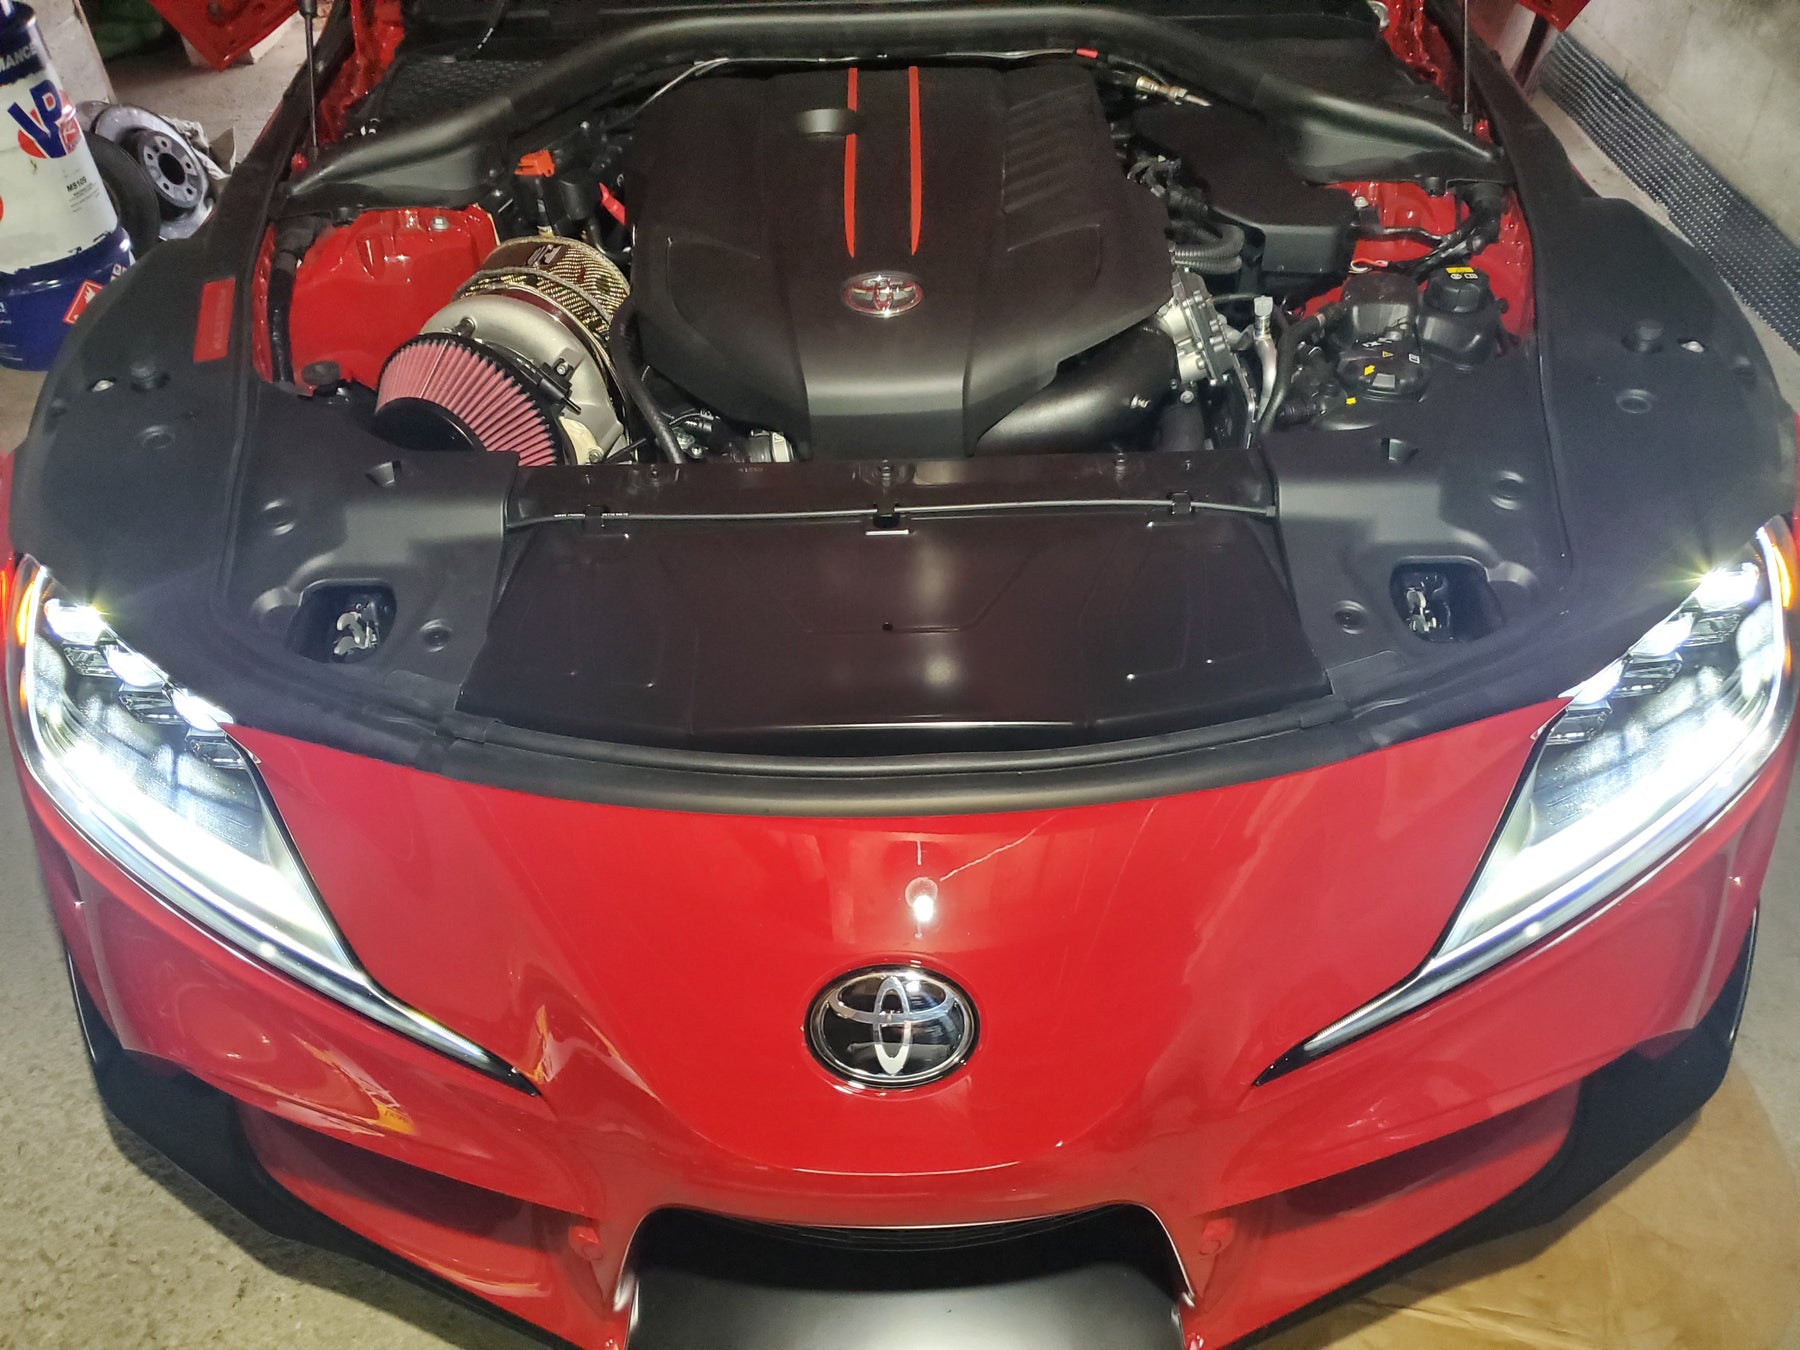 **OFFICIAL** World Power Record and First 800+whp Supra MKV